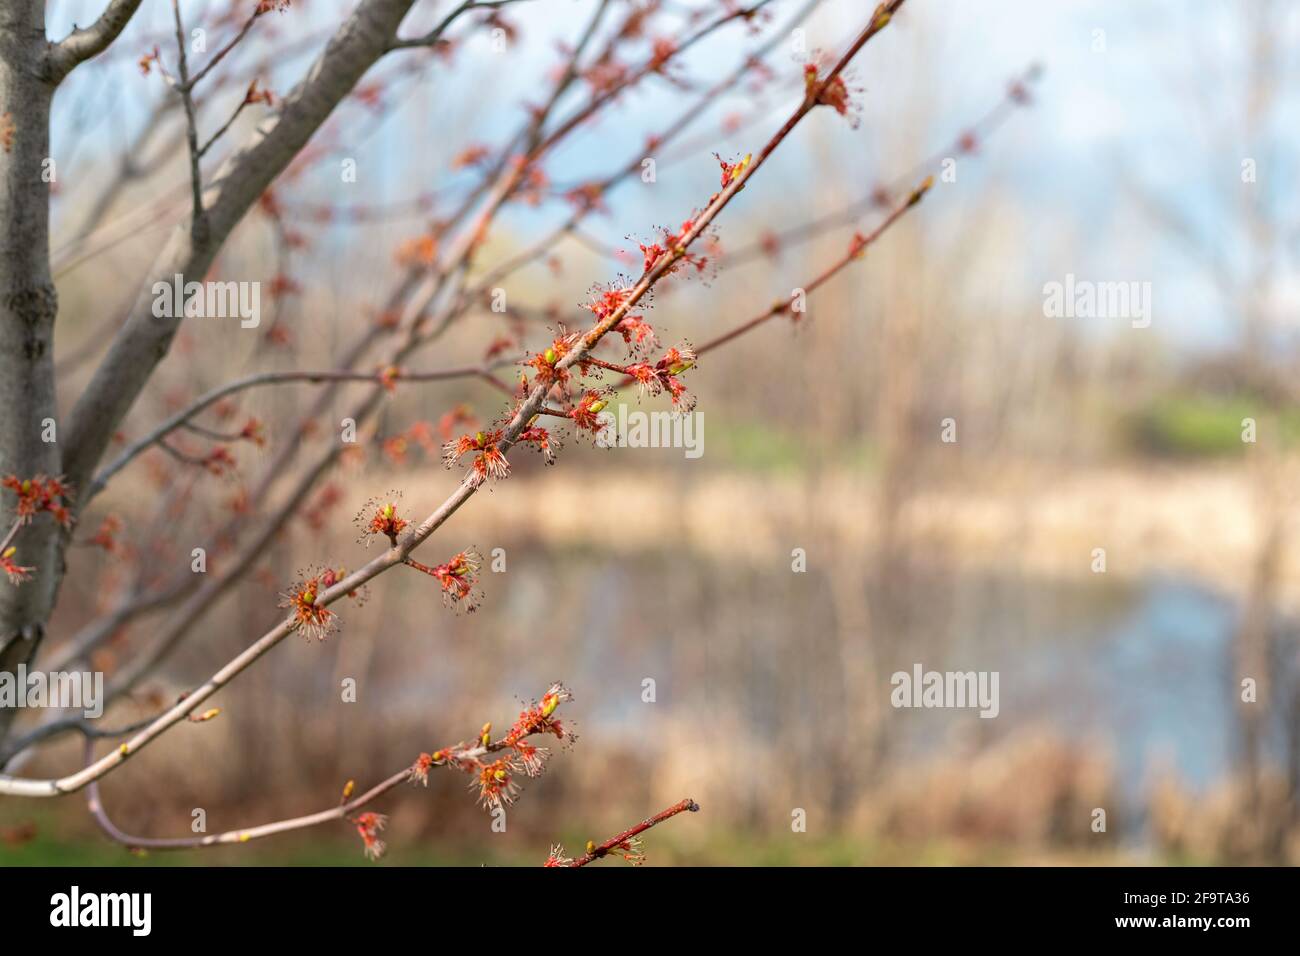 Branches of trees with growing leaves again blue sky and a pond. Spring in the park. Stock Photo